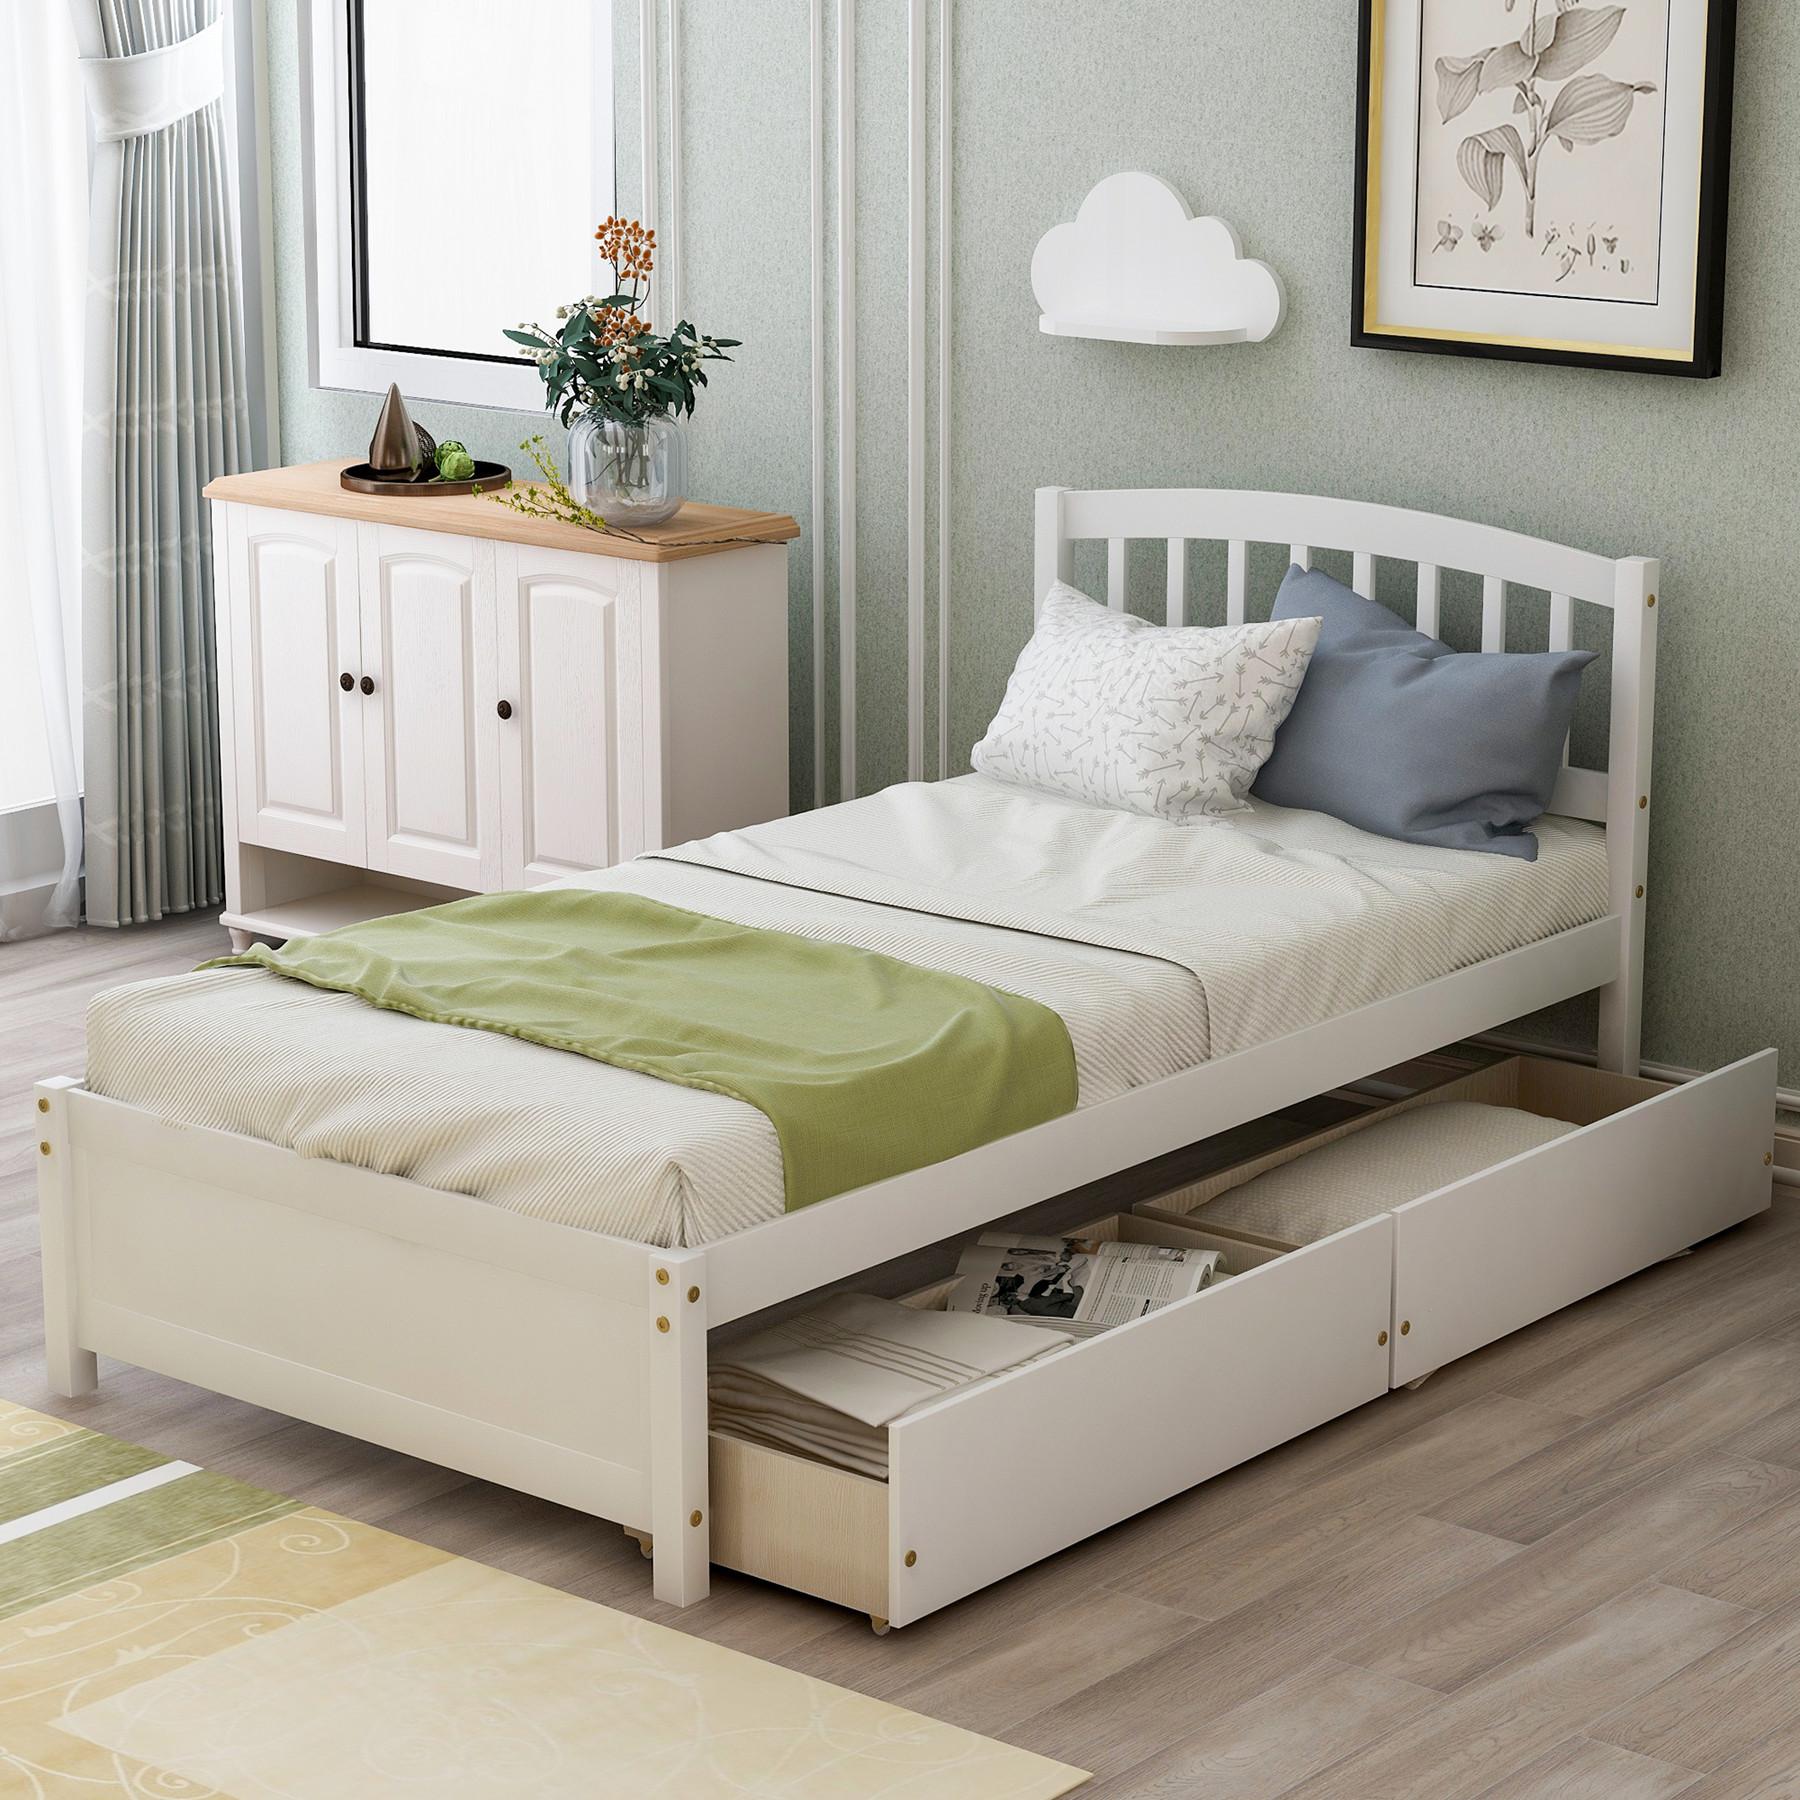 Twin Size Platform Bed with Two Storage Drawers, Wood Bed Frame with Headboard, White 79.5x41.8x37.4inch - image 1 of 7